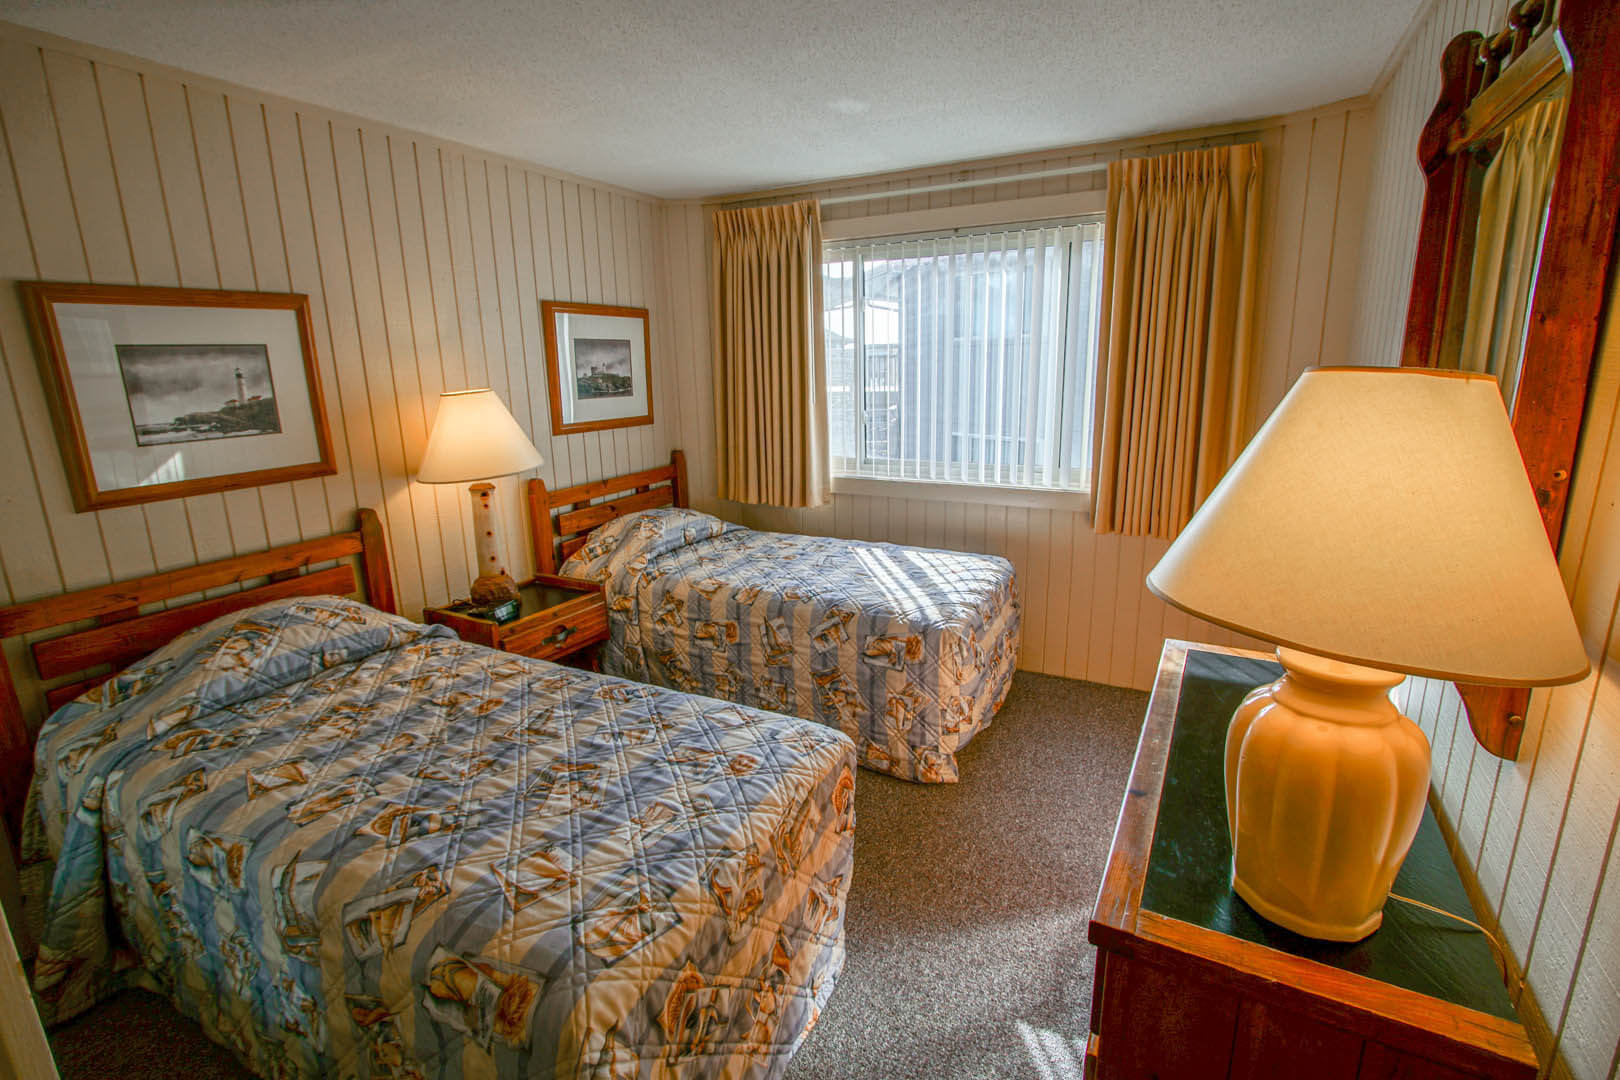 A cozy 2 bedroom with double beds at VRI's Outer Banks Beach Club in North Carolina.